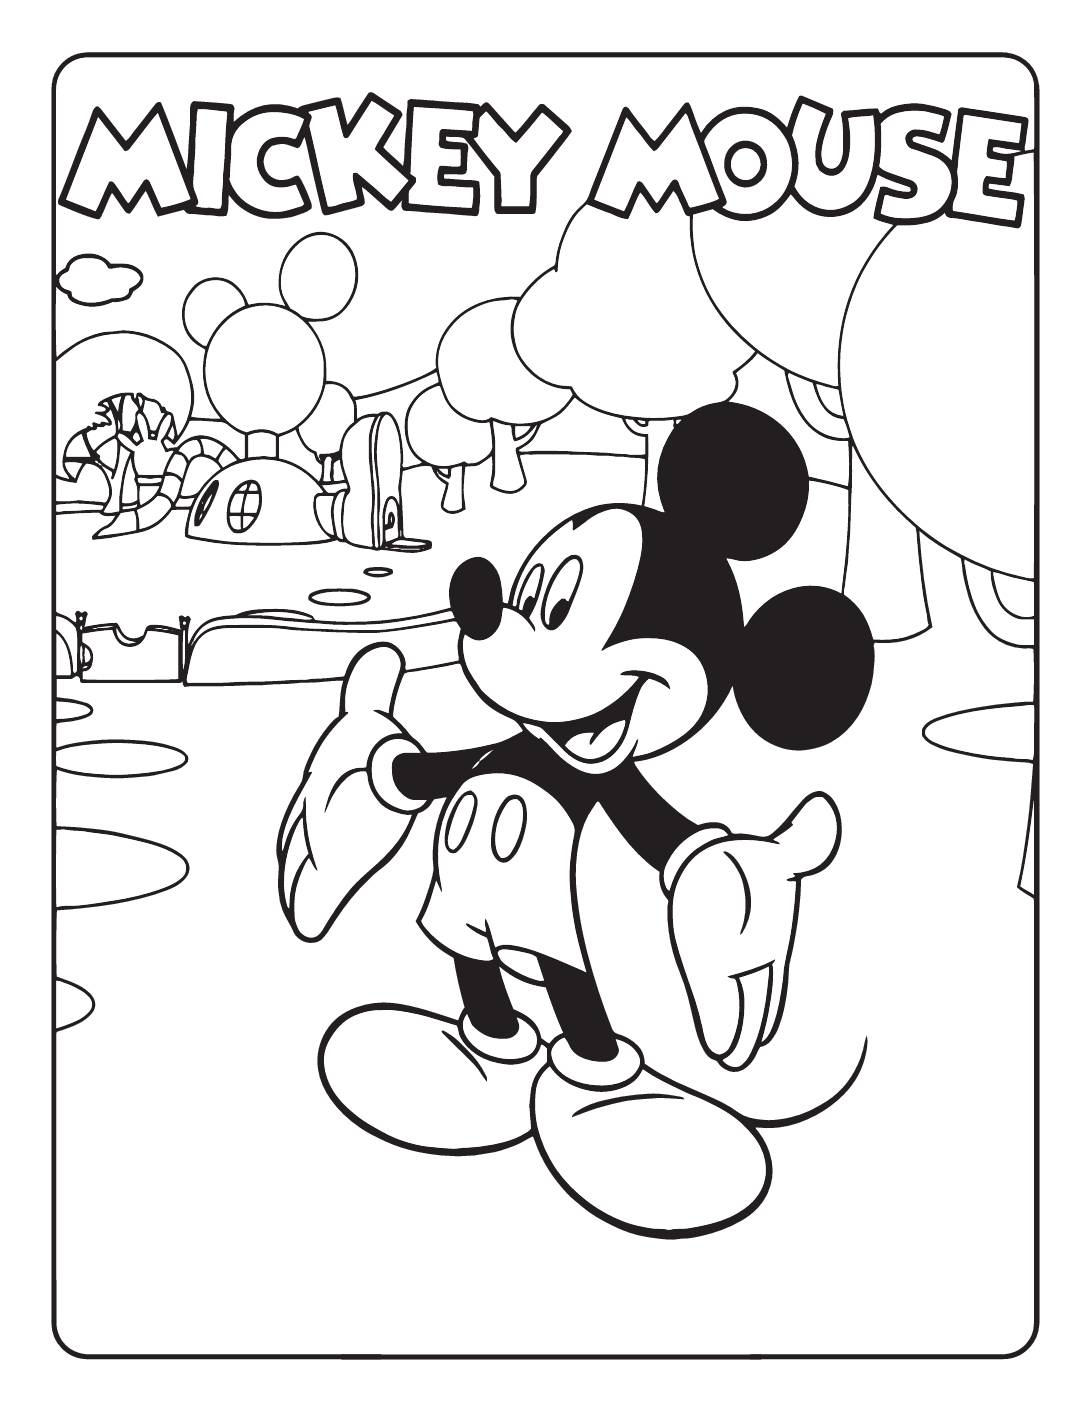 Mickey Mouse Coloring Page7 Coloring Pages